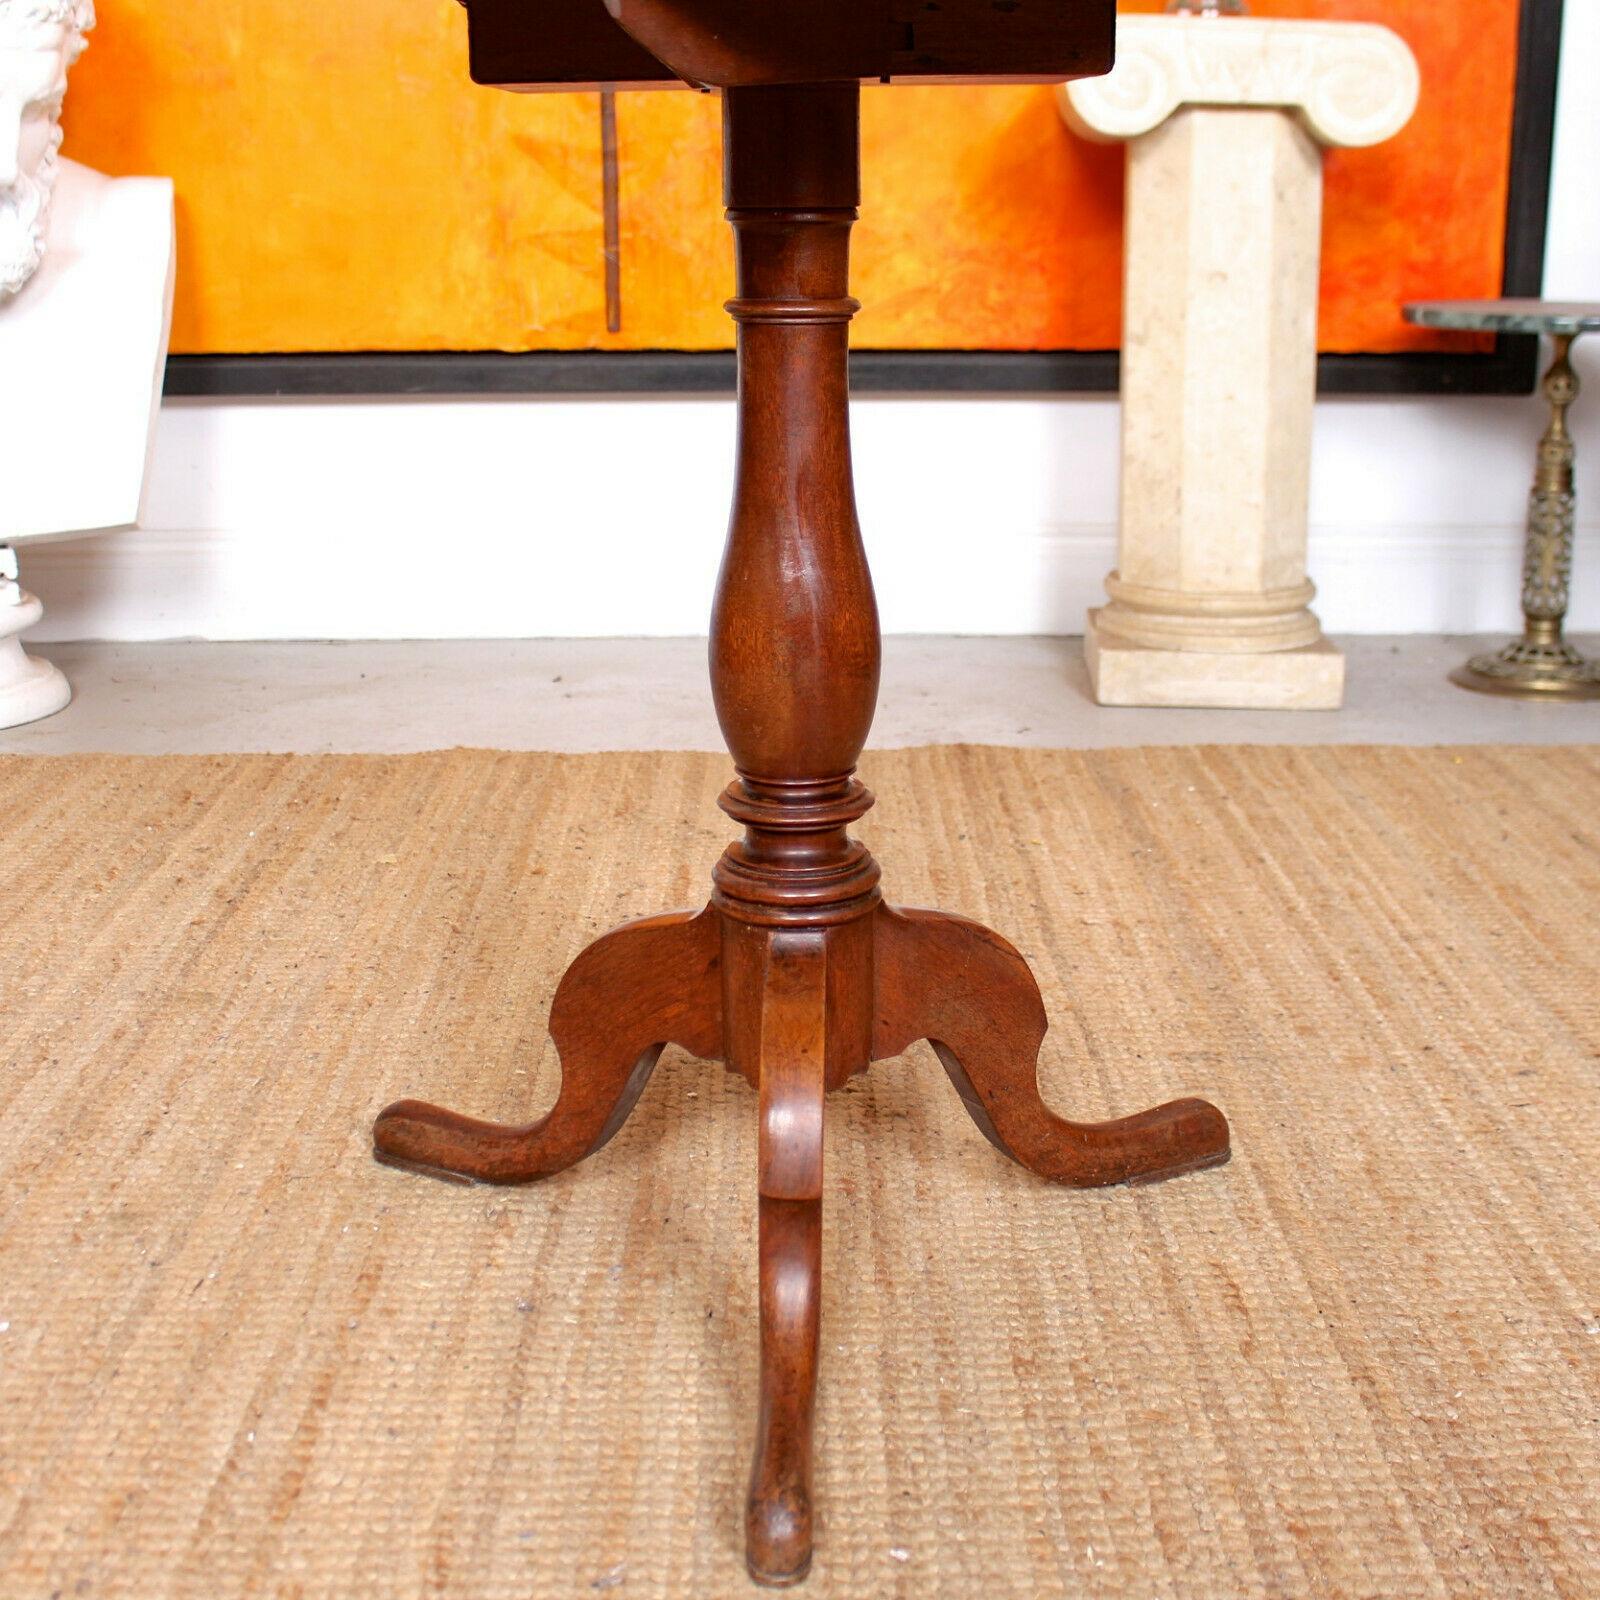 English Side Table Drop-Leaf Tripod 19th Century Mahogany Victorian Side Table For Sale 2